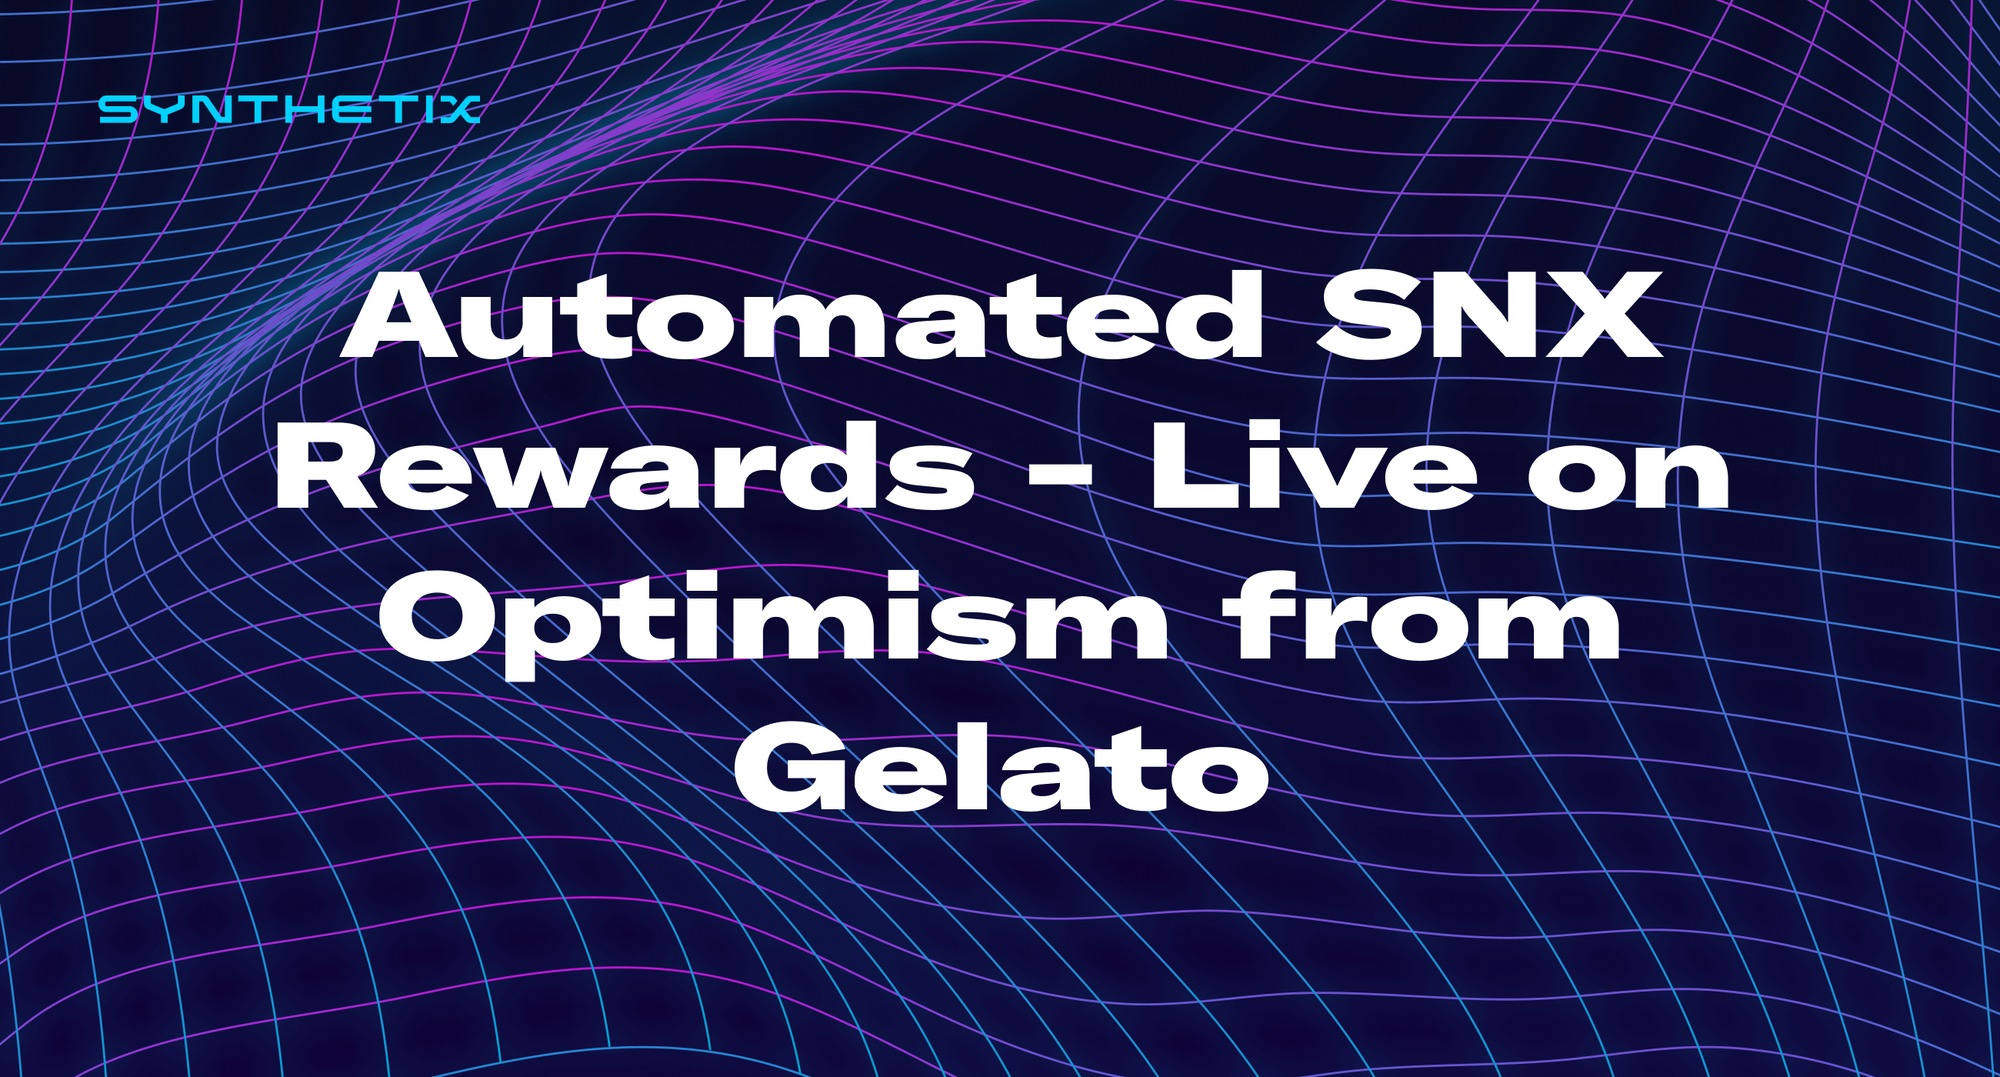 Automated SNX Rewards - Live on Optimism (from Gelato)